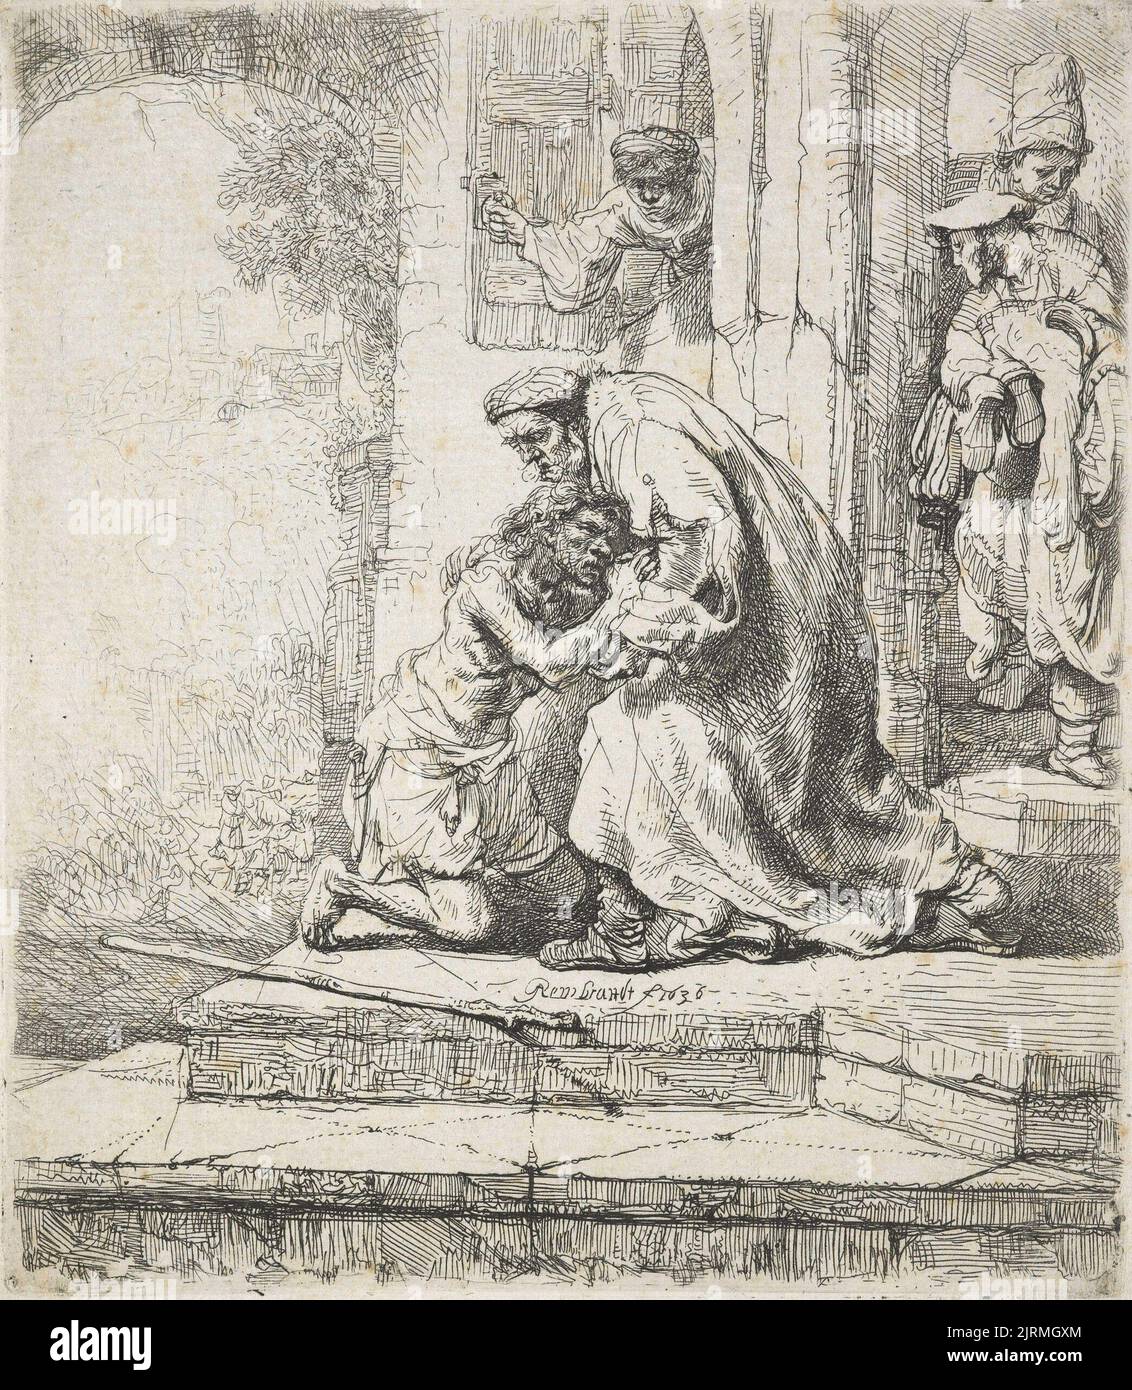 The return of the prodigal son., 1636, Netherlands, by Rembrandt van Rijn. Gift of Bishop Monrad, 1869. Stock Photo